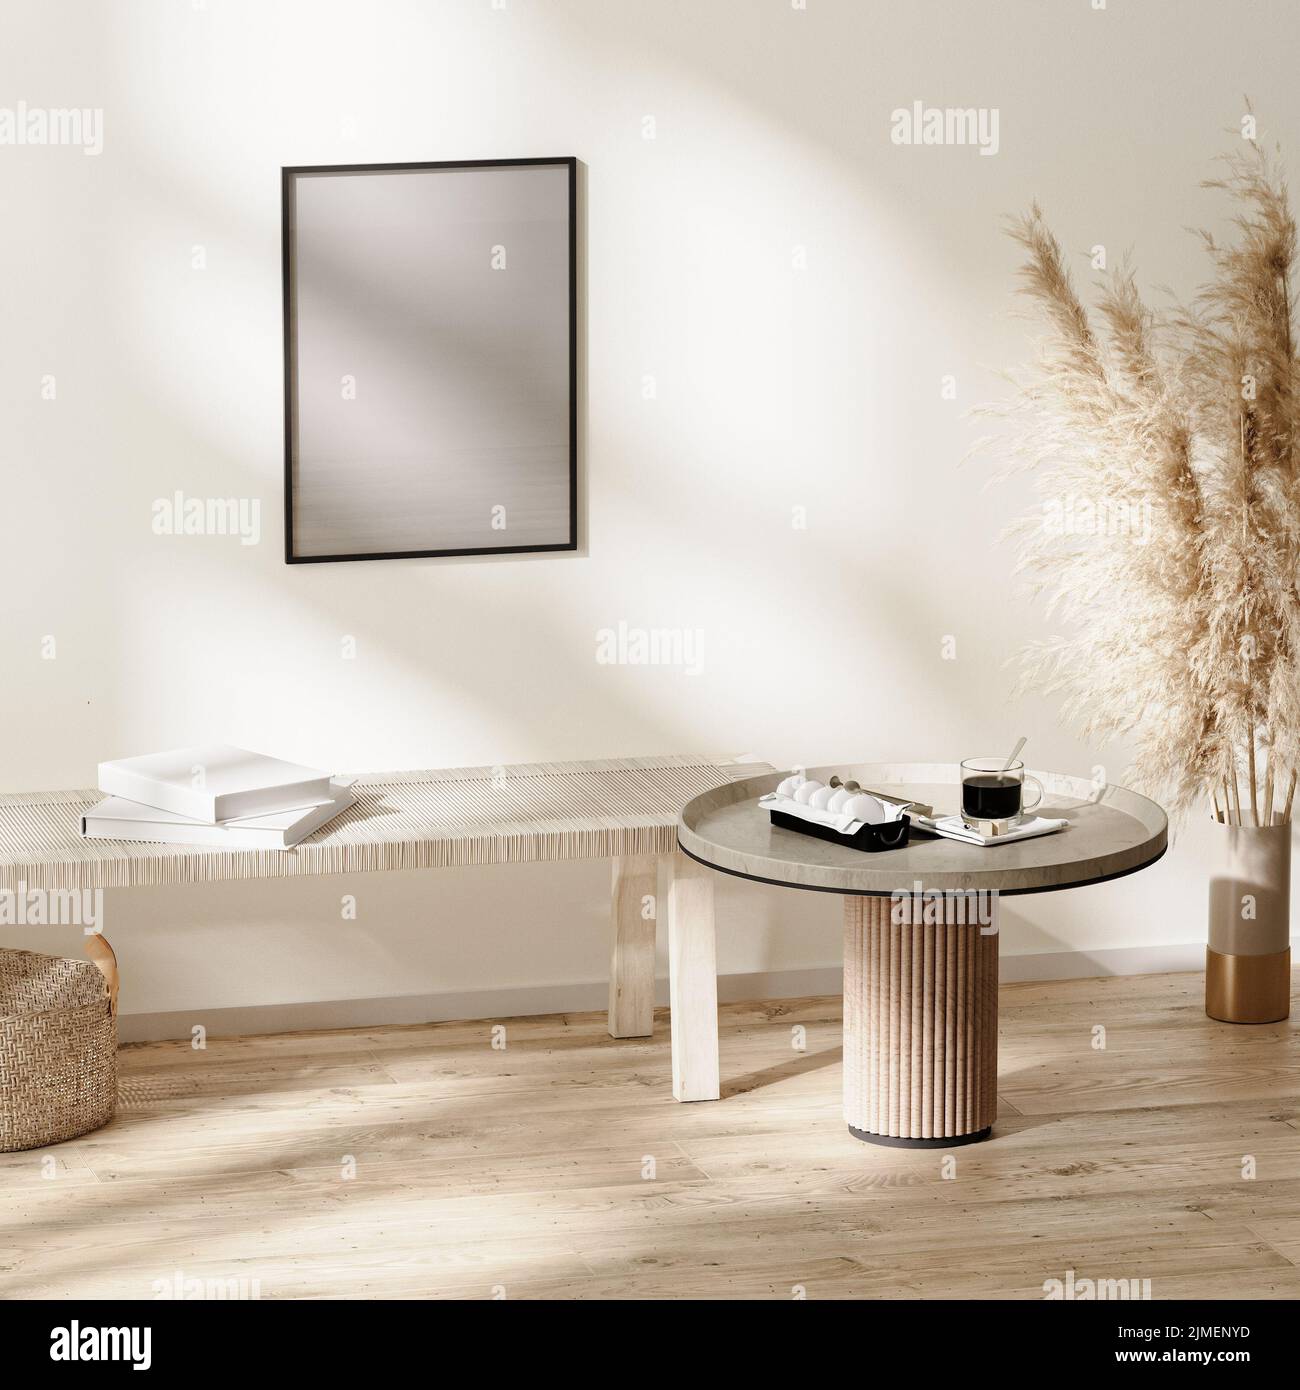 Poster frame mockup in scandinavian minimalist room interior in neutral colors with furniture, 3d illustration Stock Photo